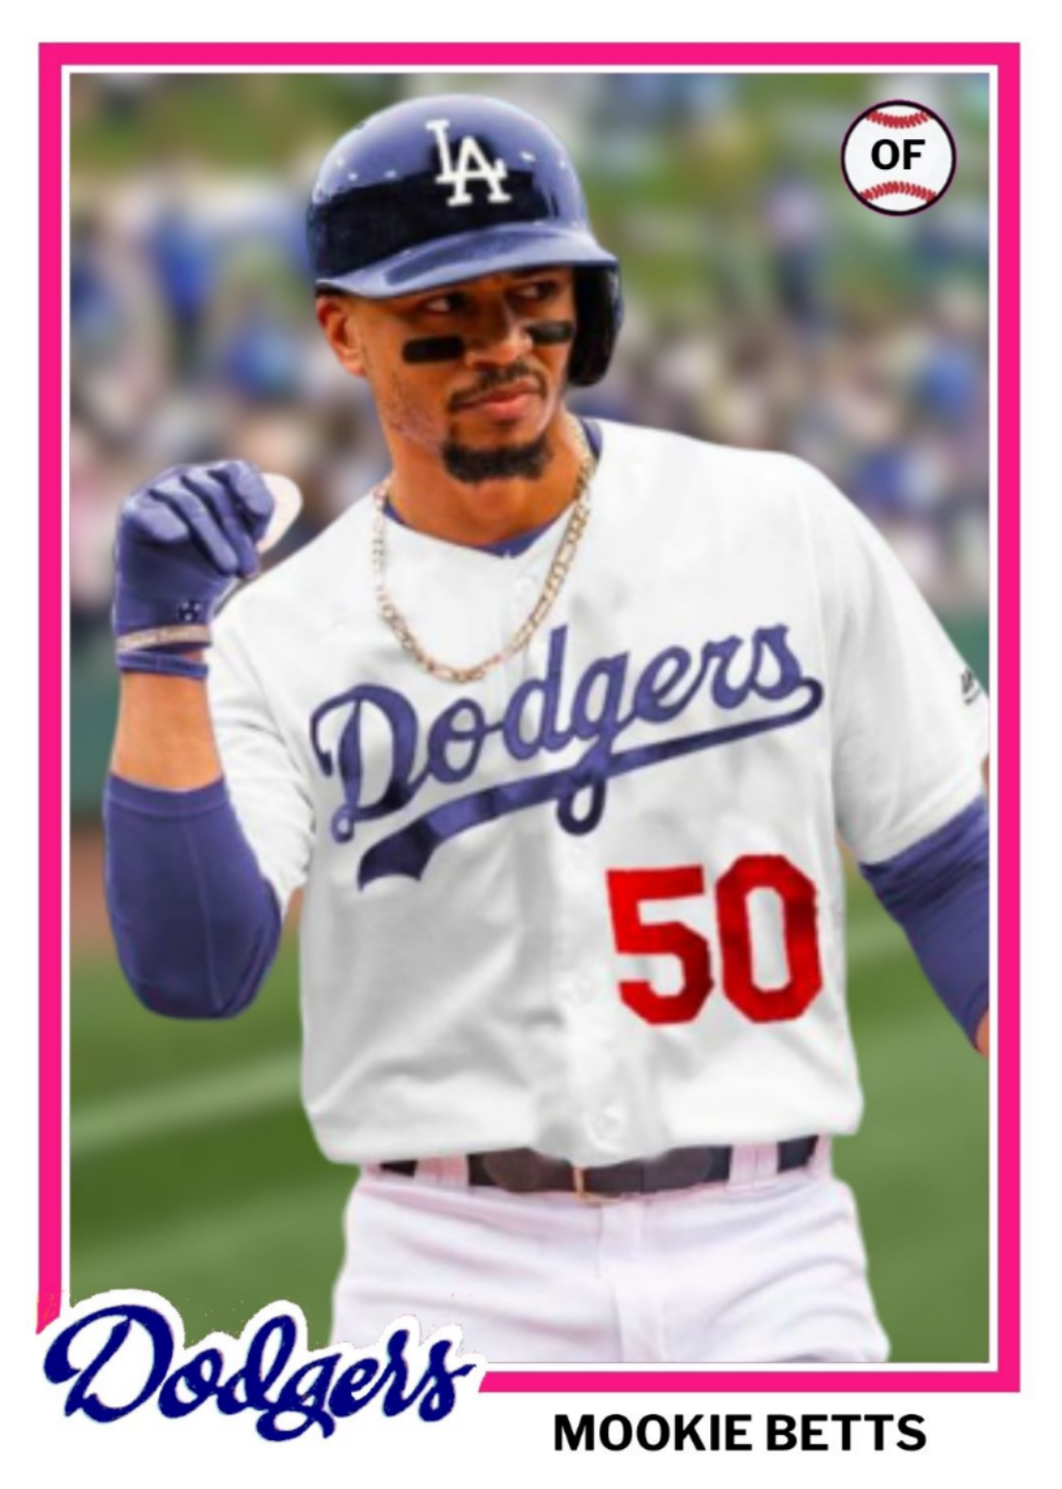 Mookie Betts Dodgers 1978 topps design. Dodgers, Mookie betts, Baseball trading cards